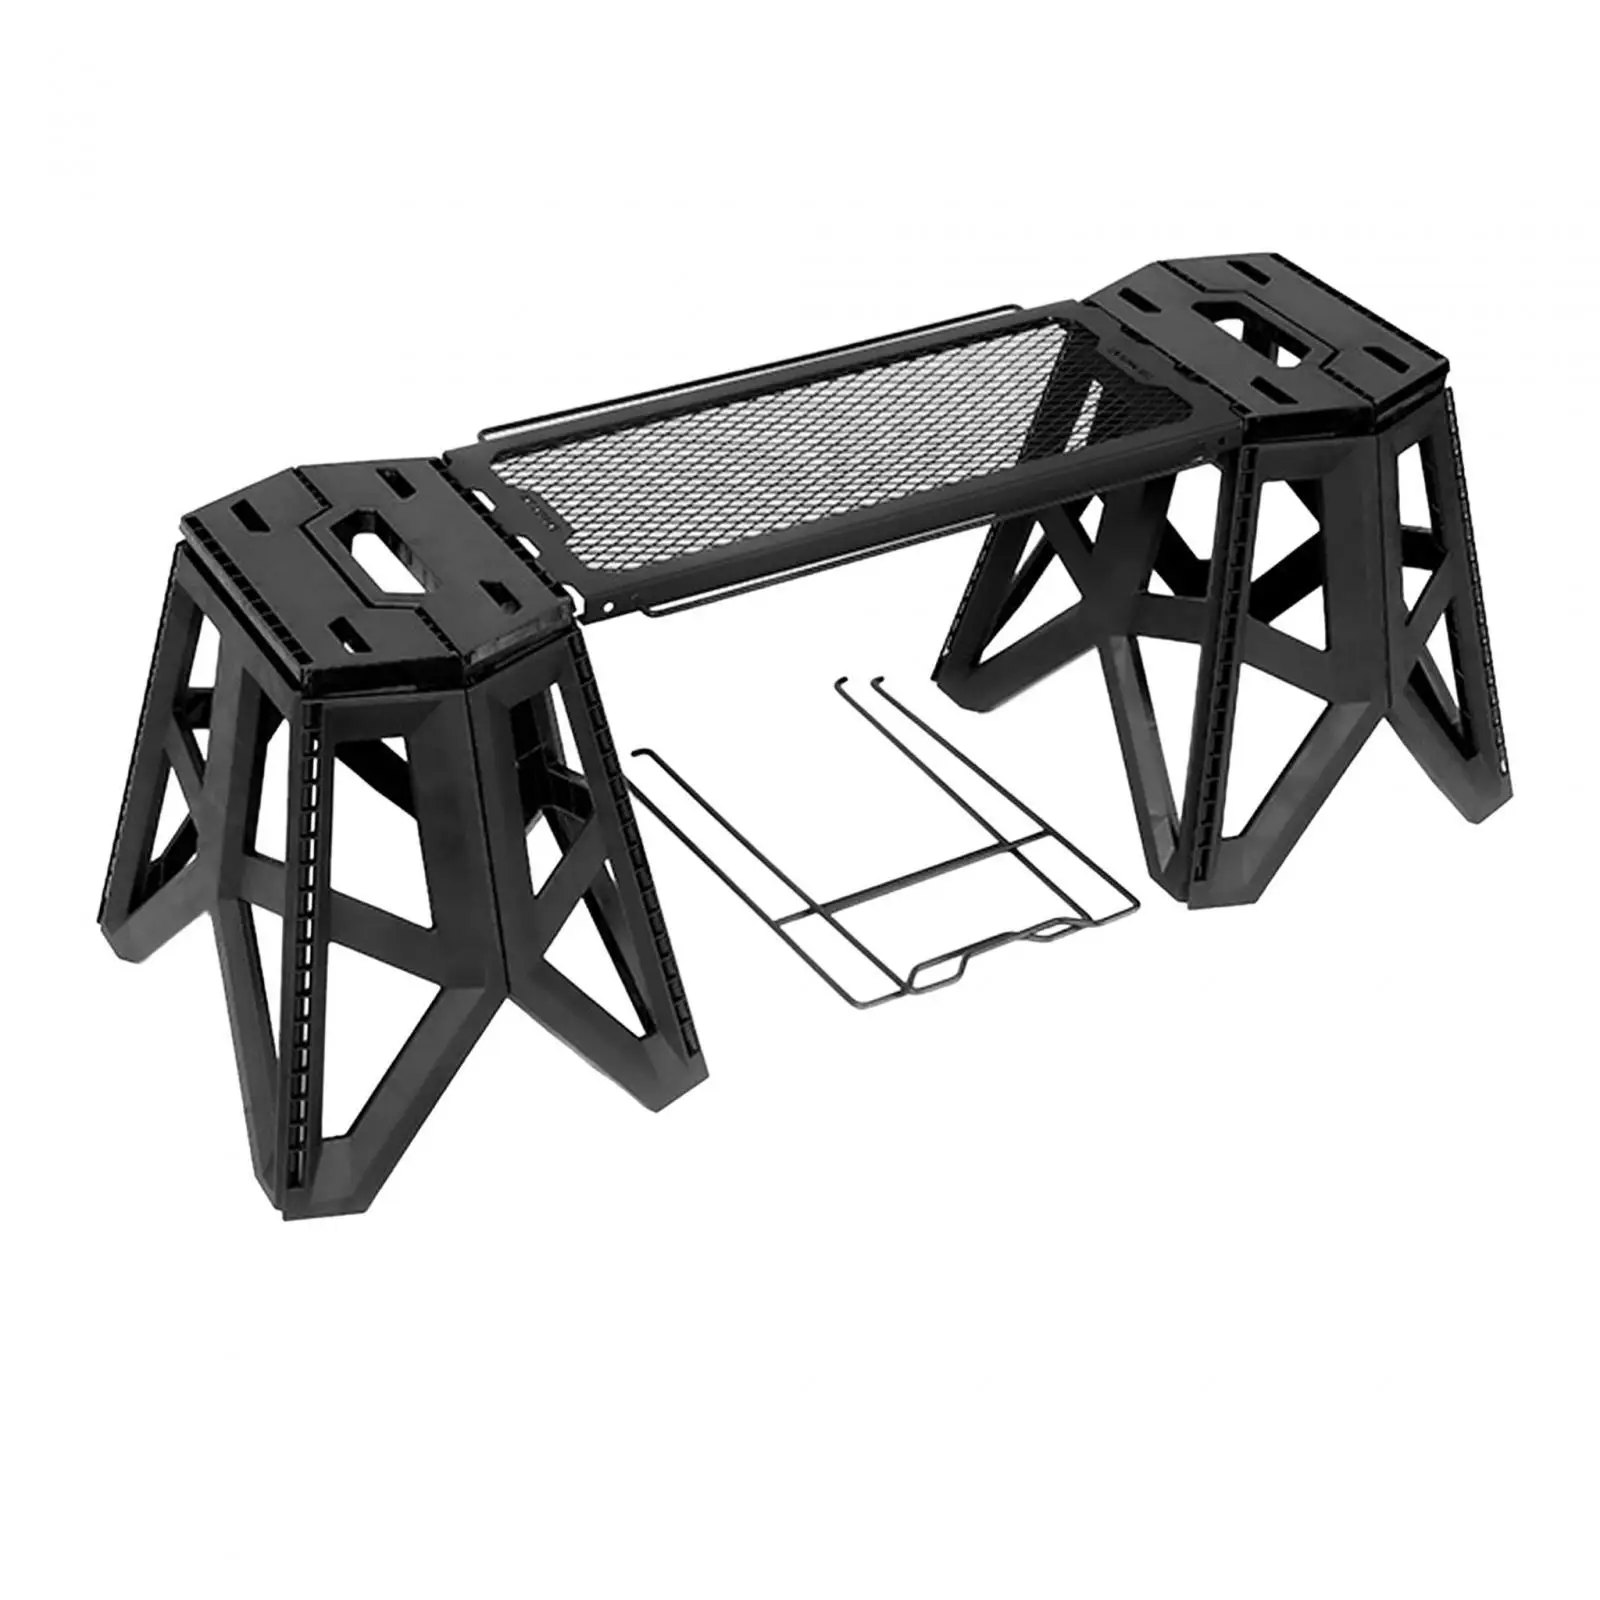 Camping Stool and Table Lightweight Outdoor Table and Stools Multifunctional Folding Table for Picnic BBQ Beach Hiking Travel